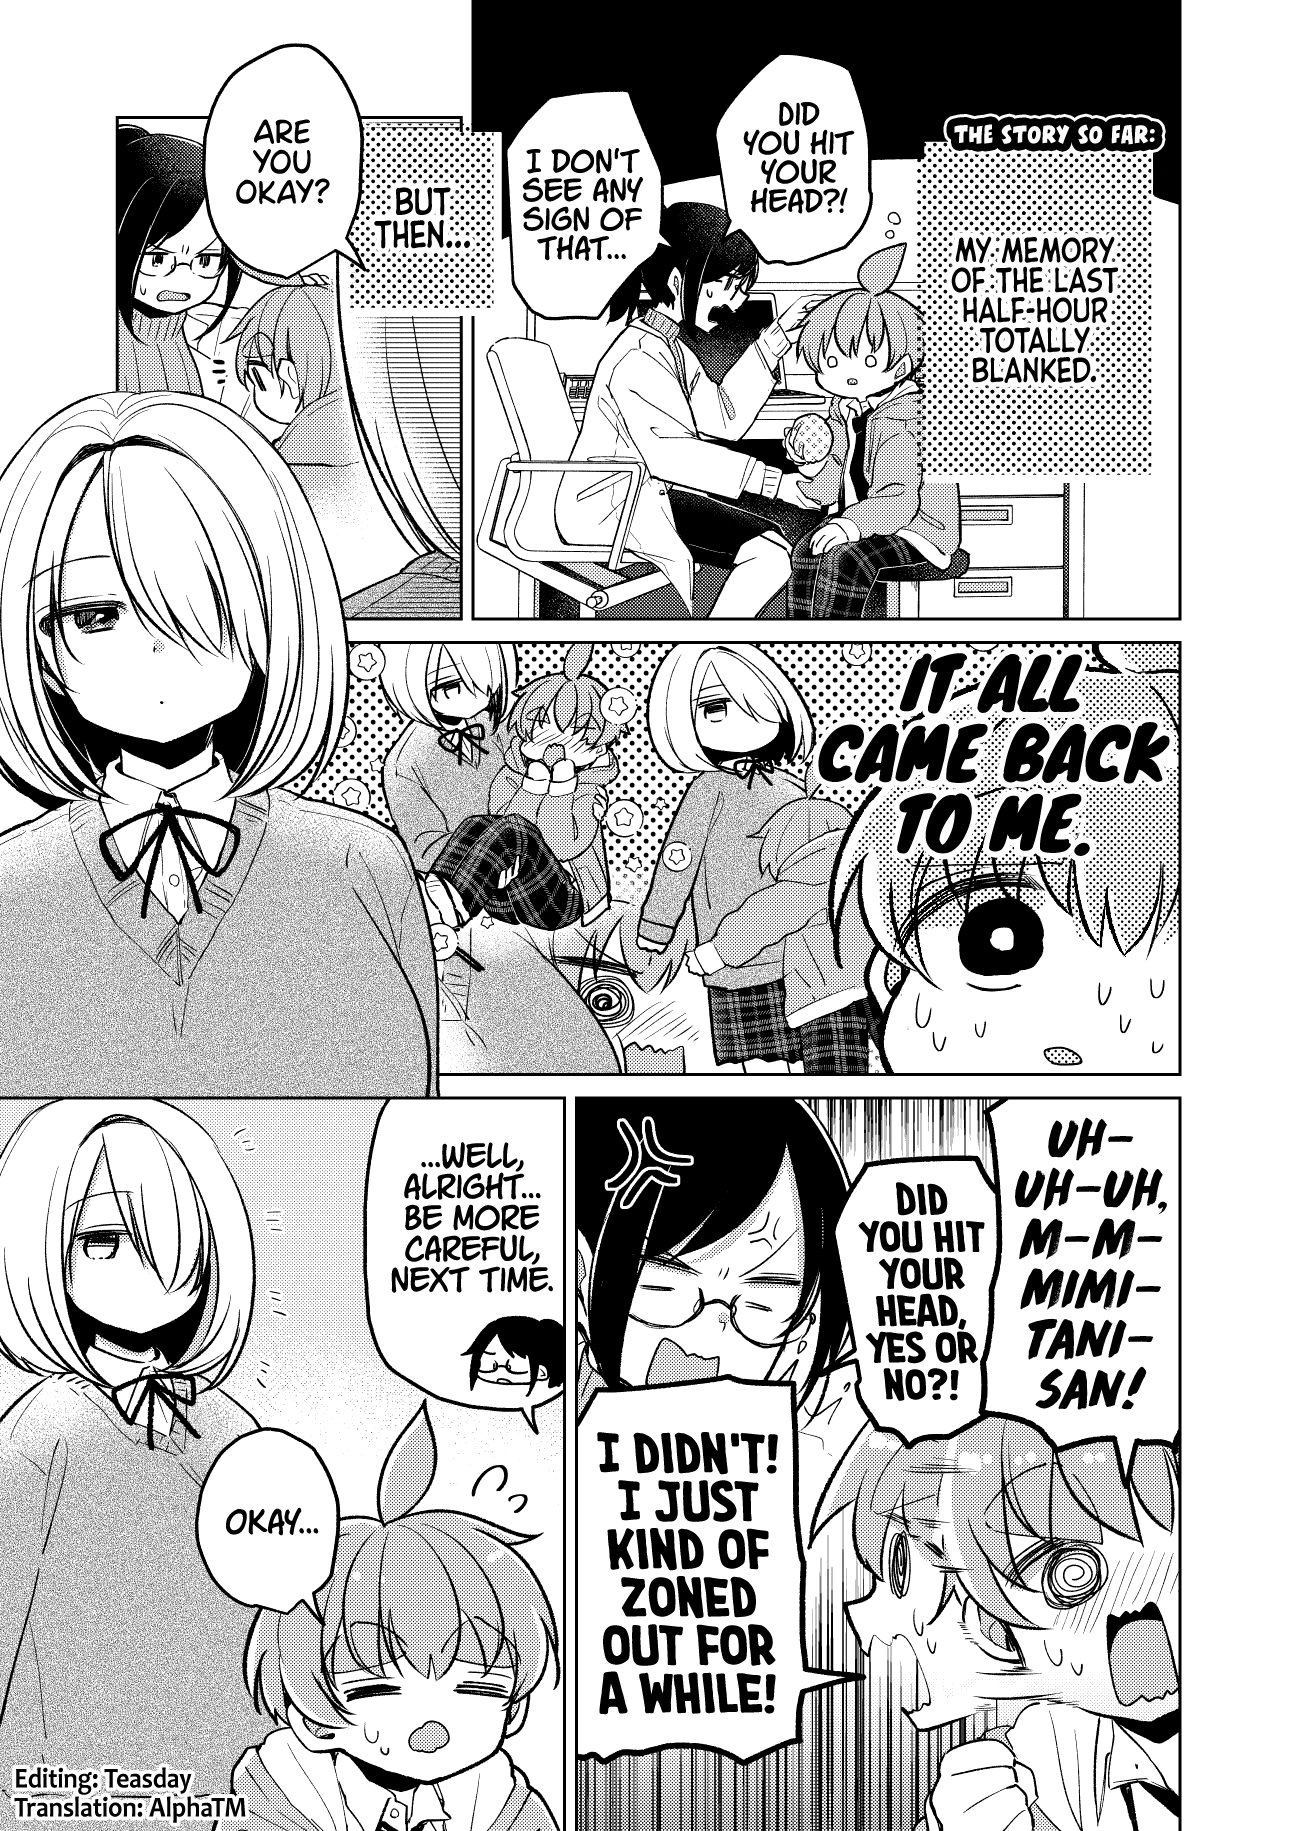 Mimitani-San, The Tallest In The Class chapter 5 - page 1